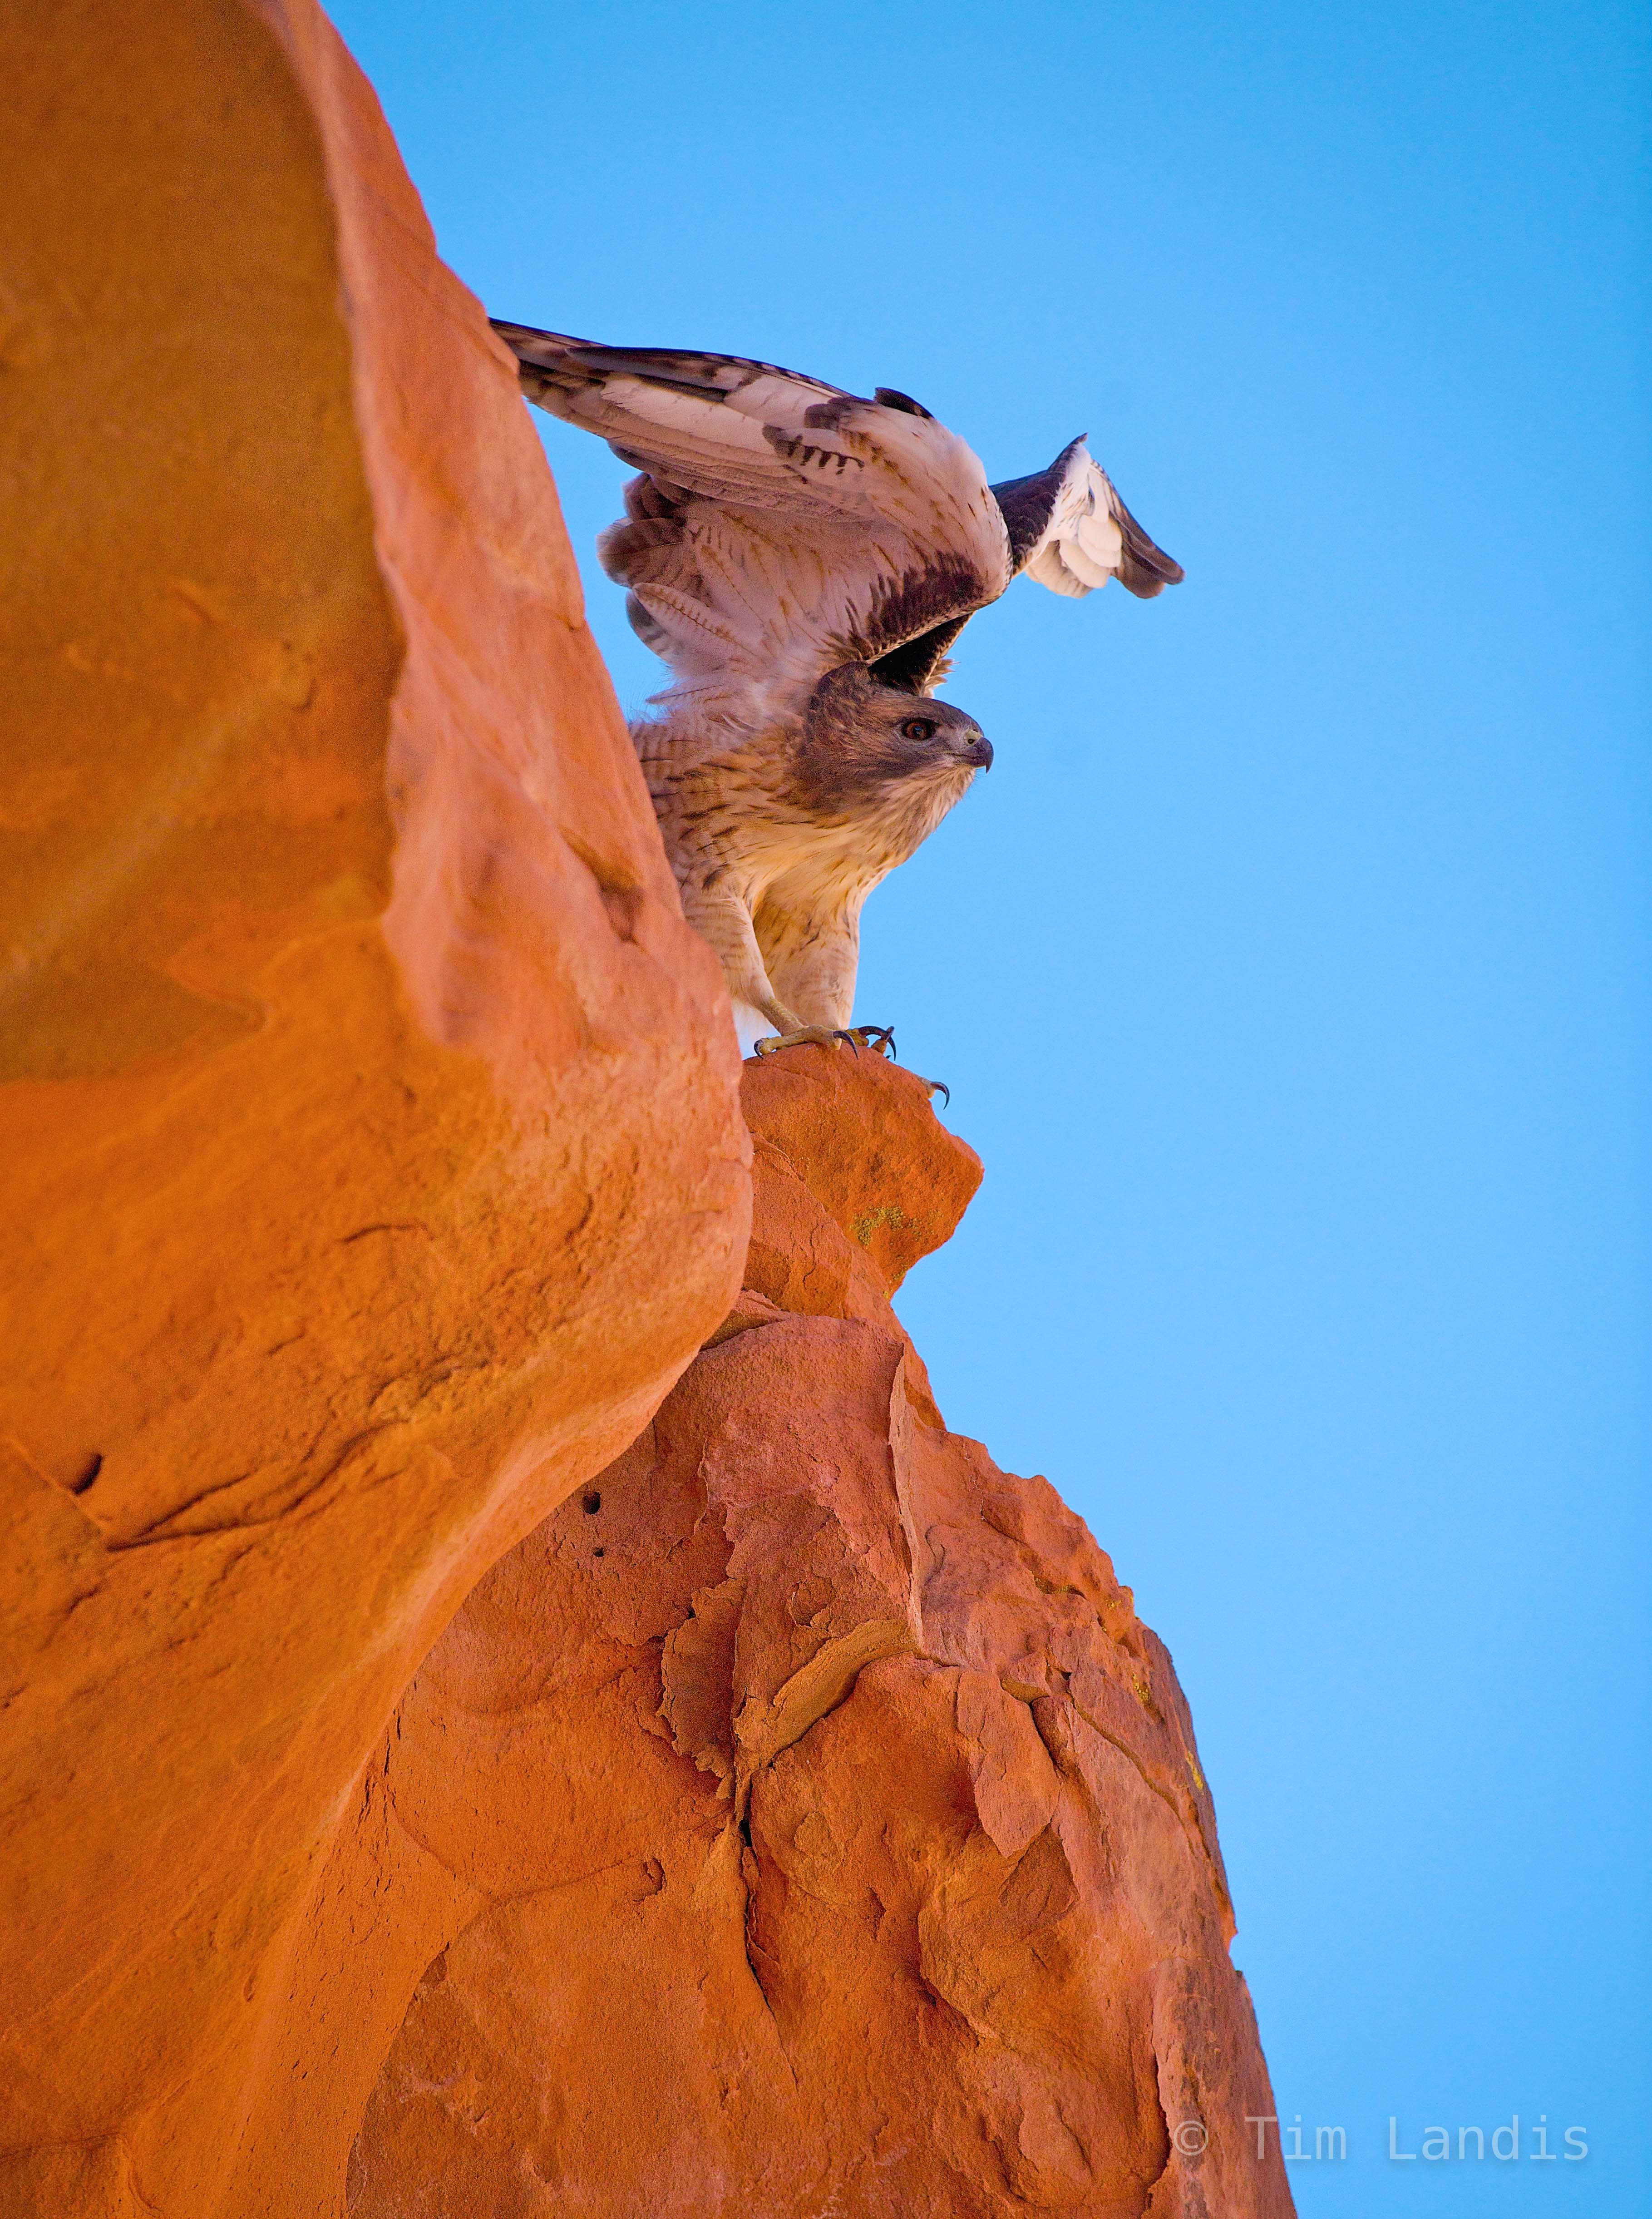 A hawk has his eye on dinner and prepares to attack